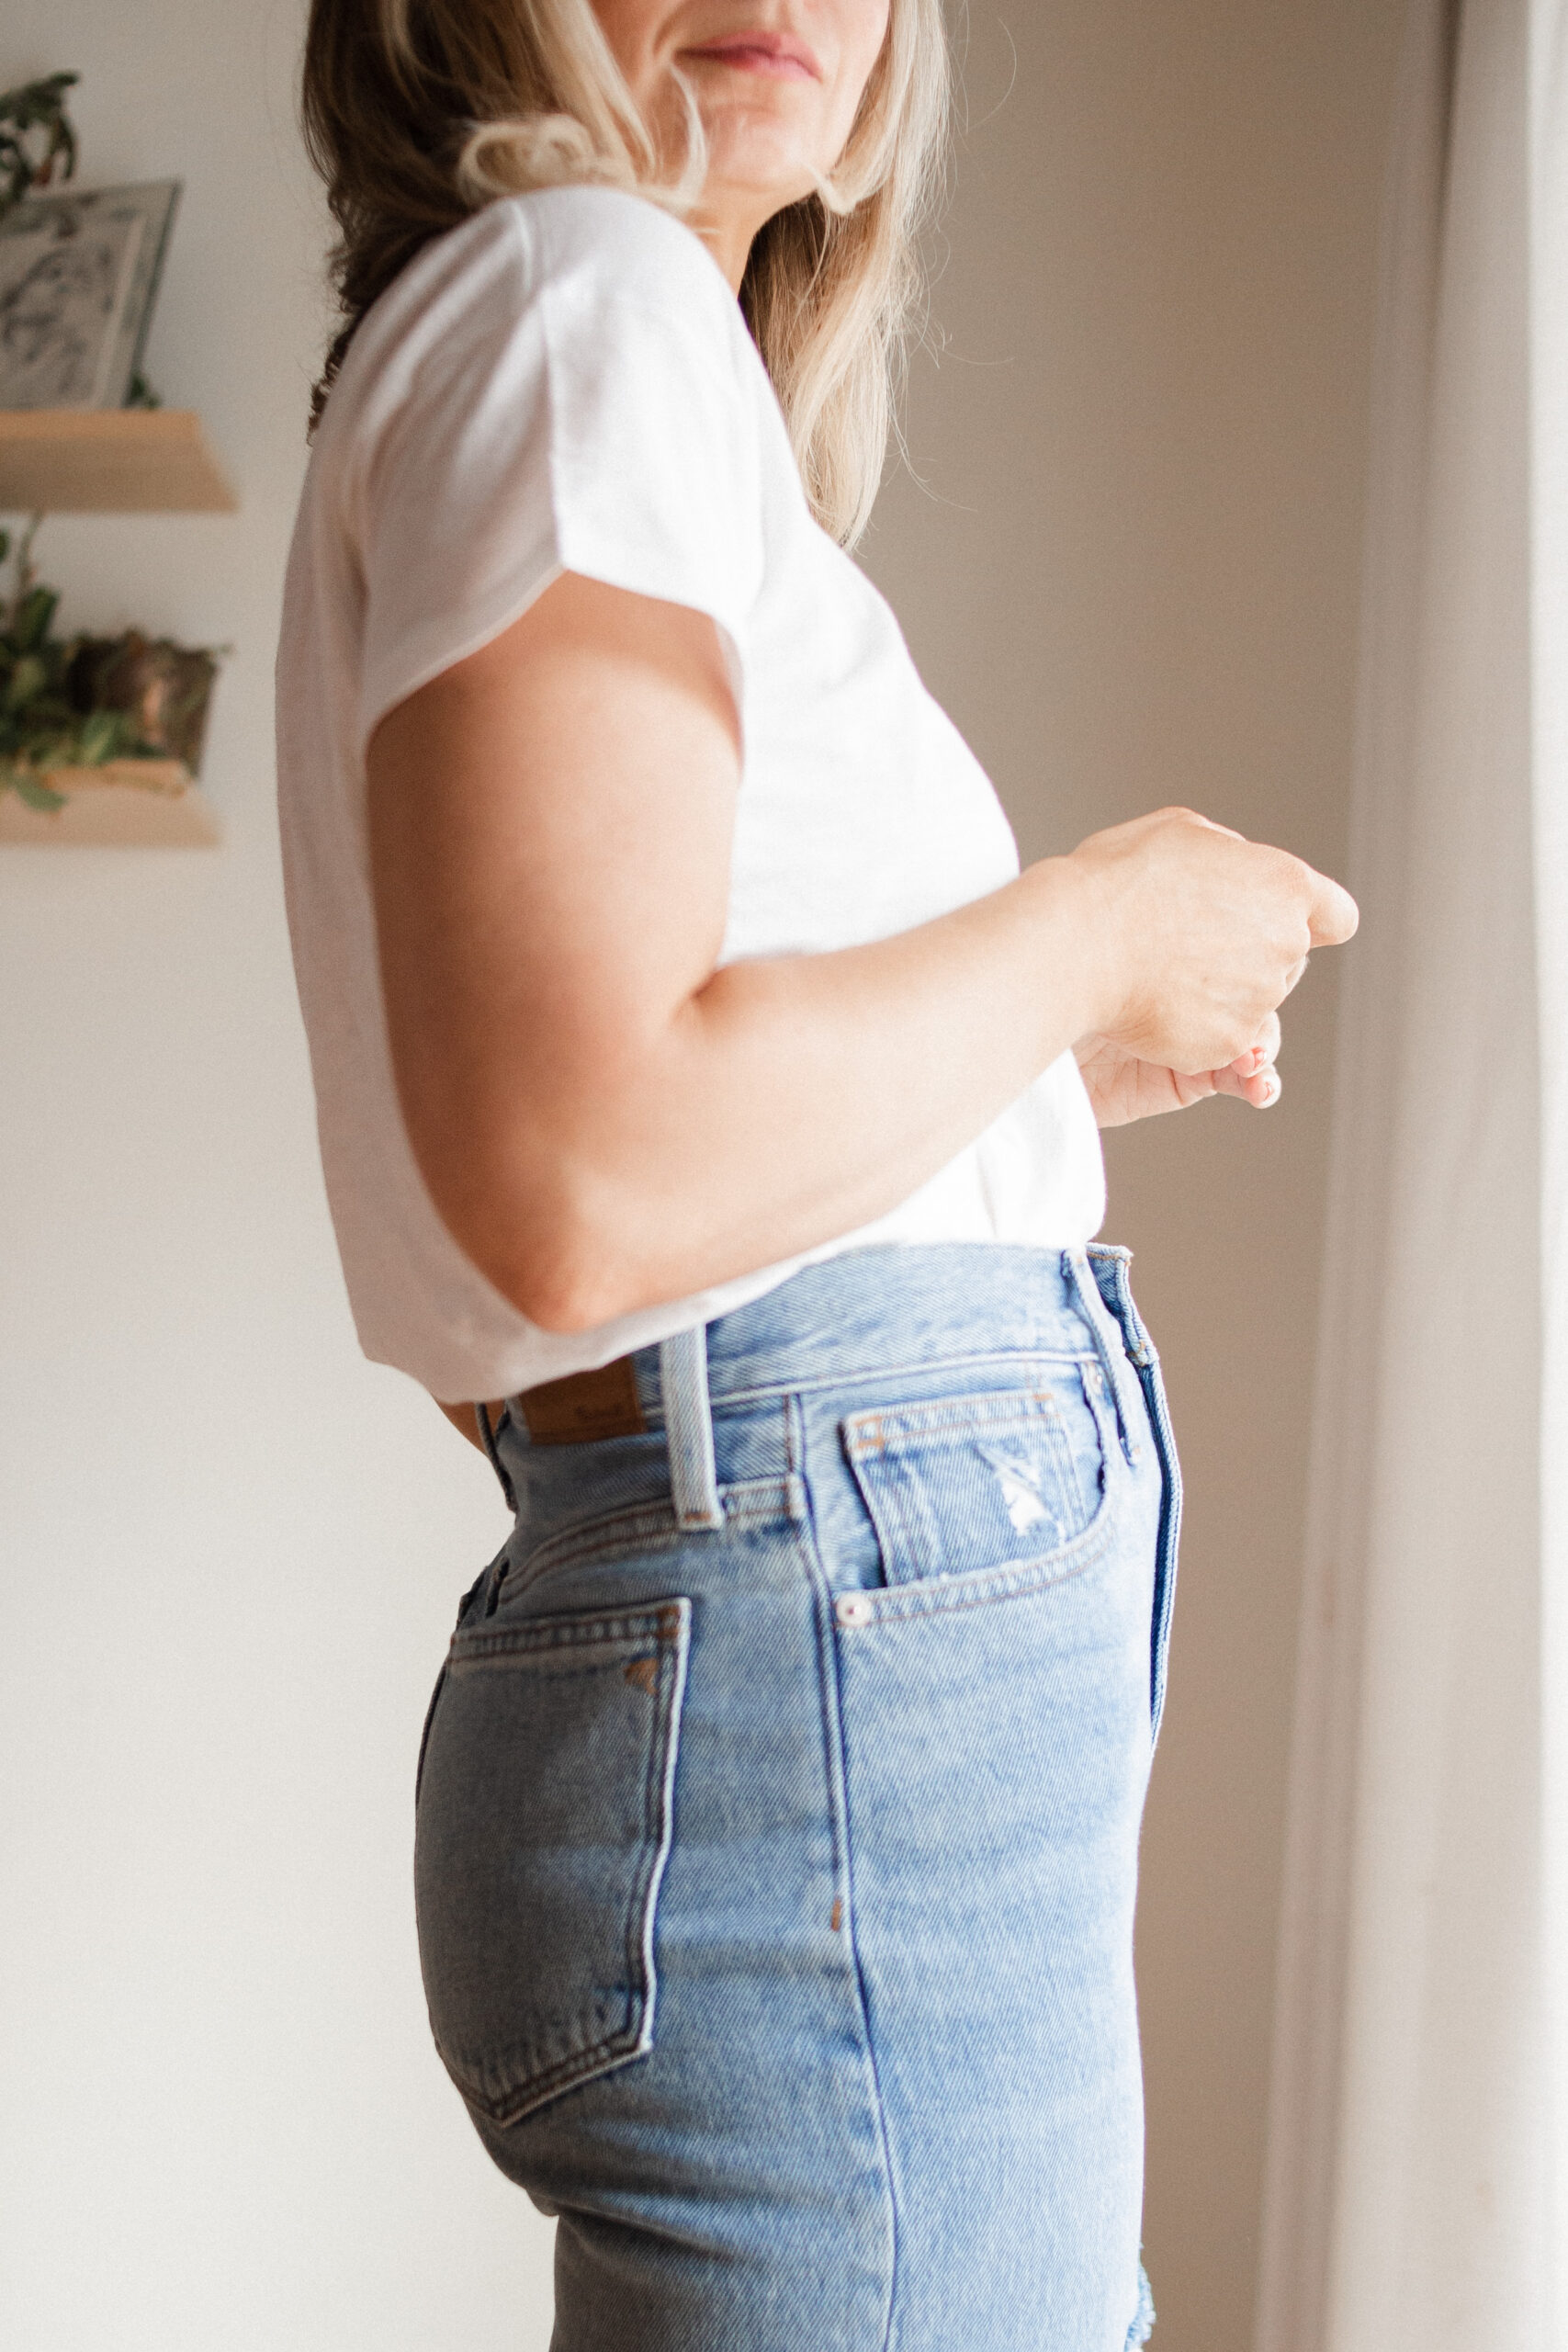 Karin Emily wears and reviews the Madewell perfect vintage wide leg jeans in her very detailed Madewell Denim Guide